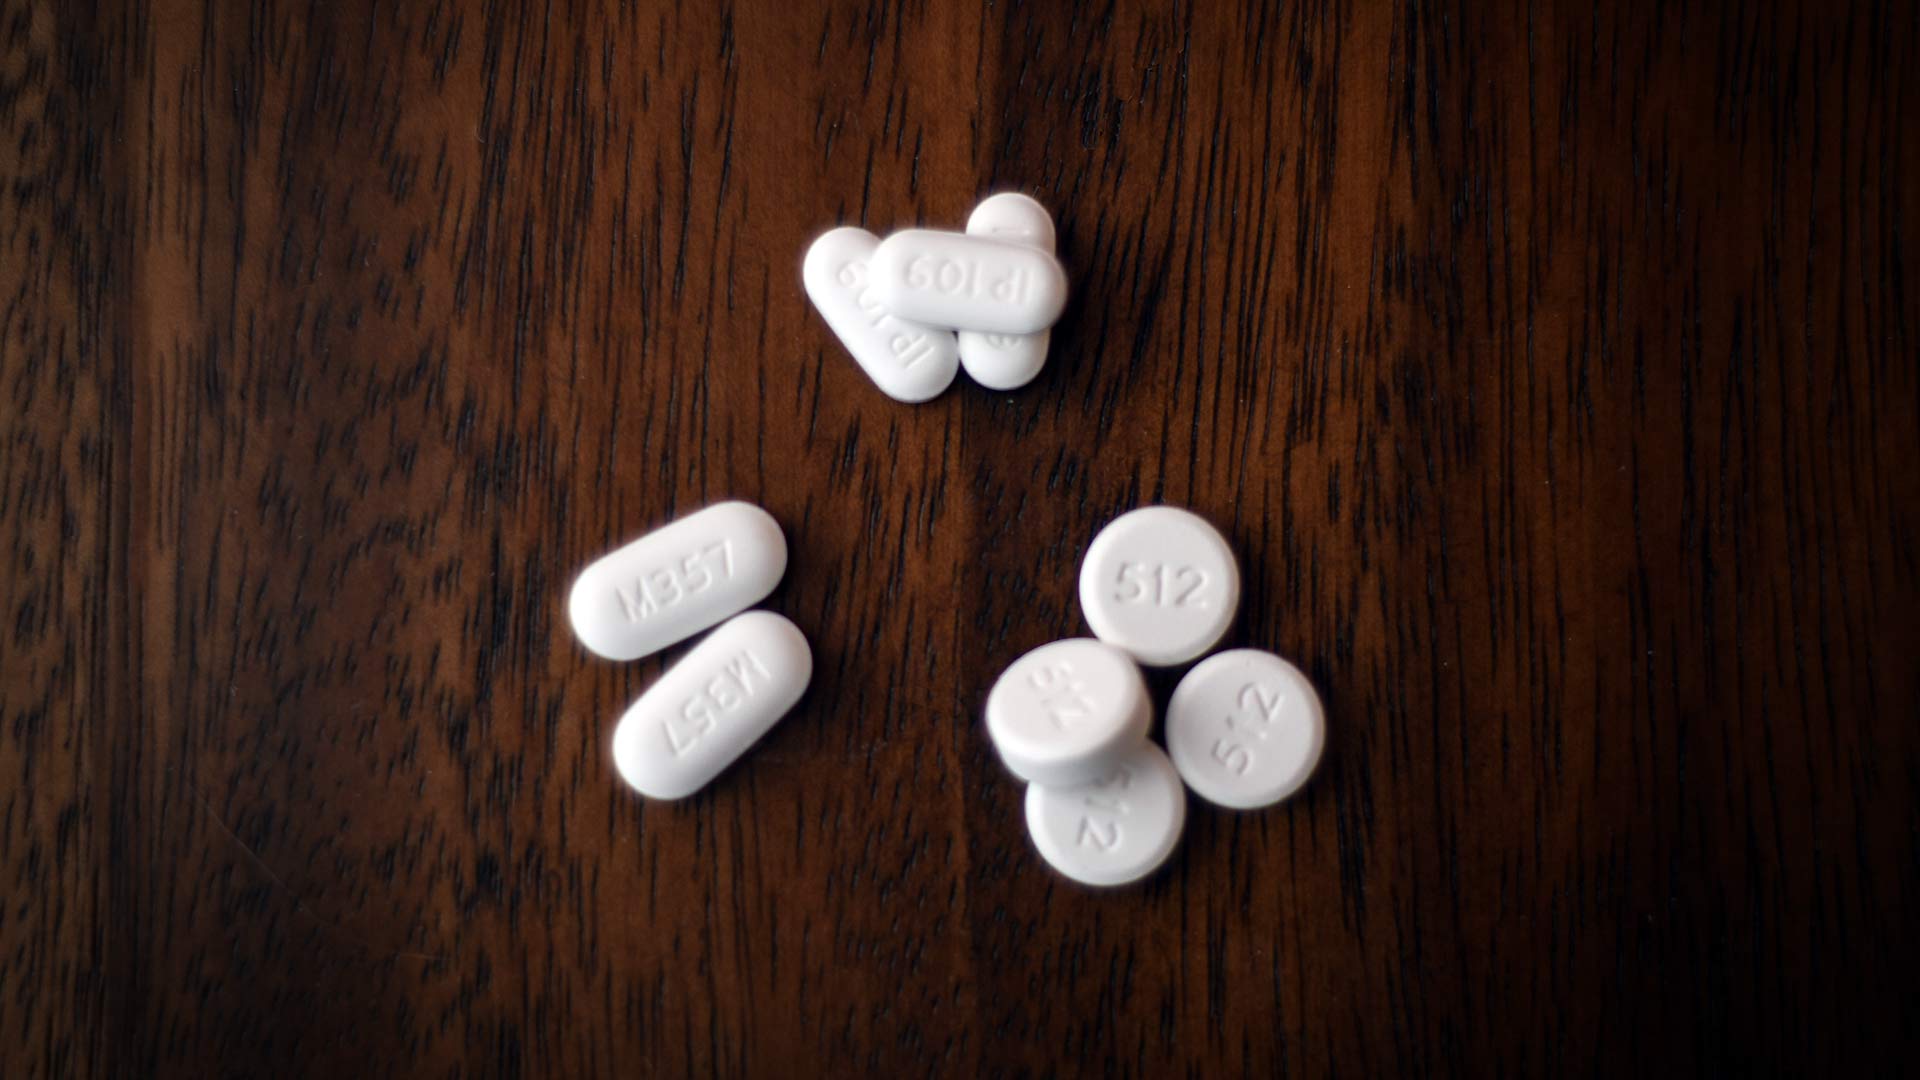 Hydrocodone and oxycodone tablets.